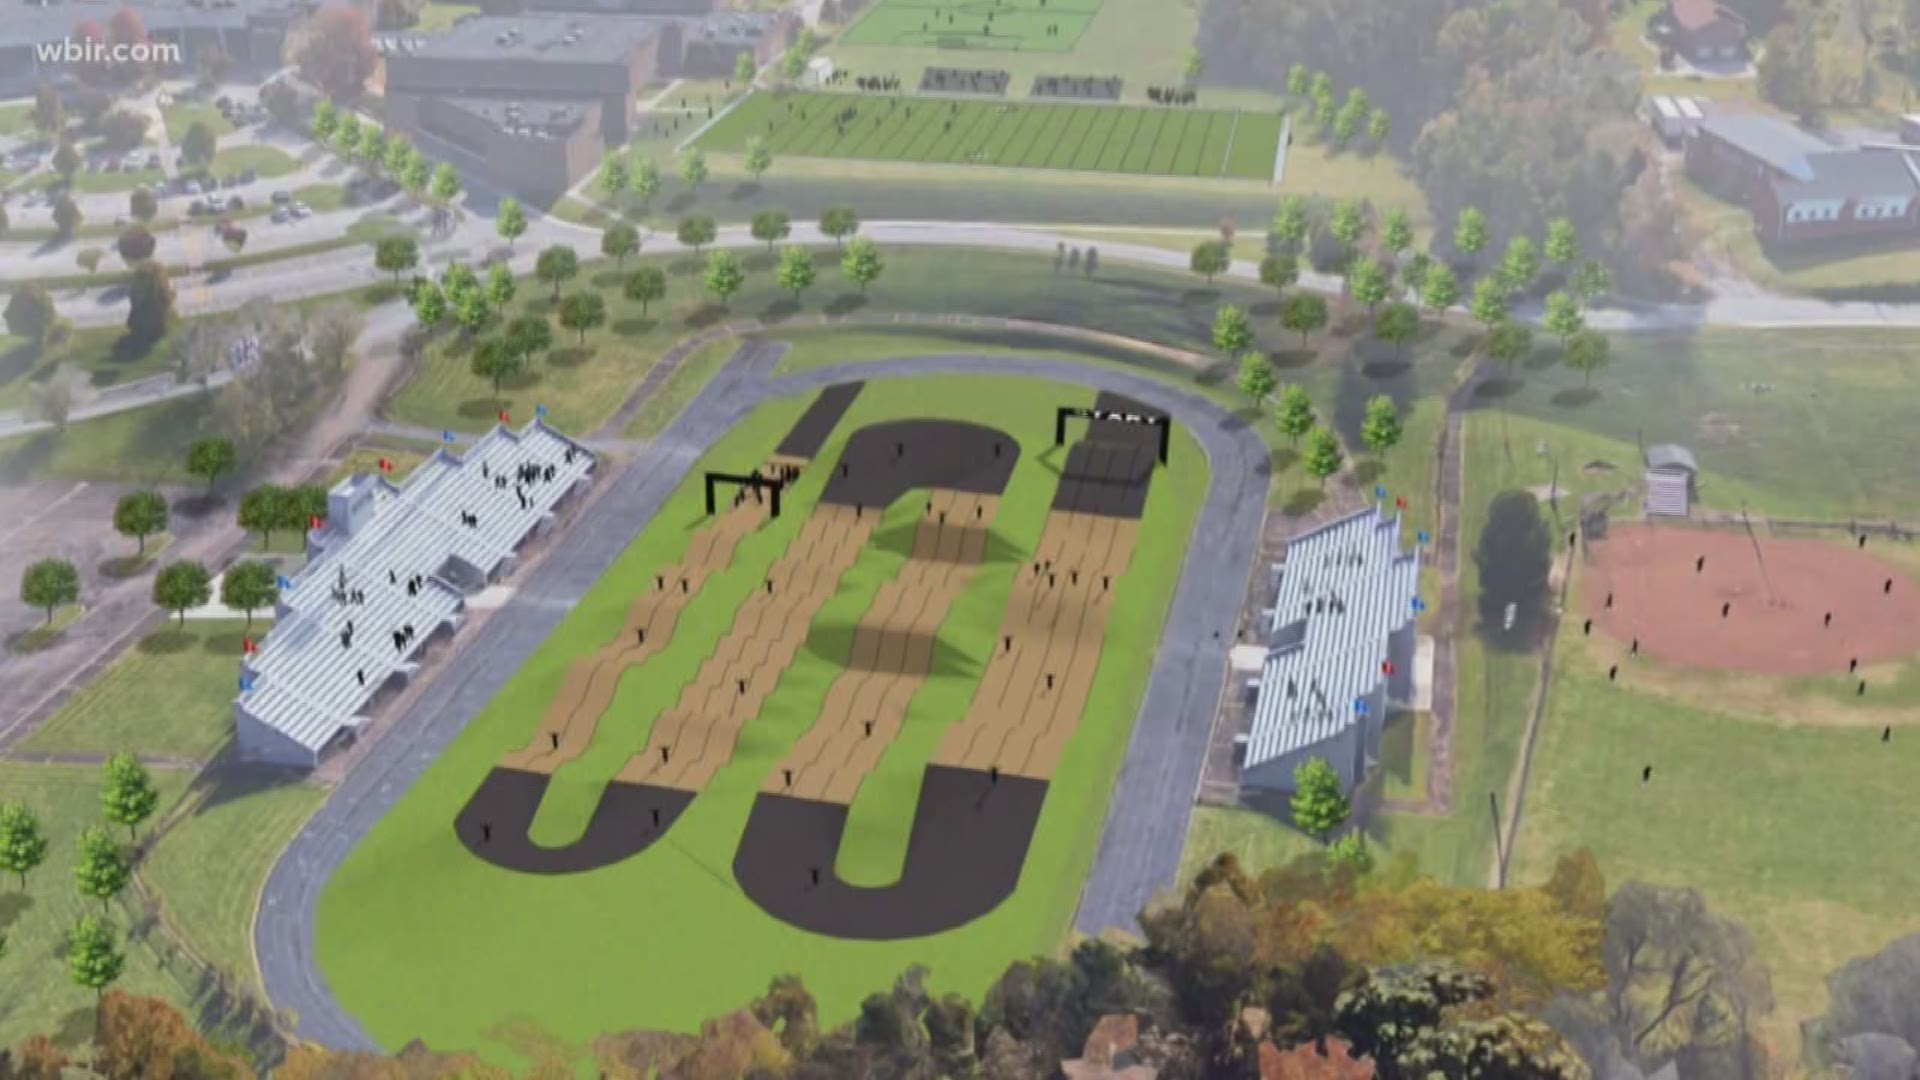 March 28, 2018: A new BMX park planned to be built at South Doyle Middle School is hundreds of thousands of dollars over budget.